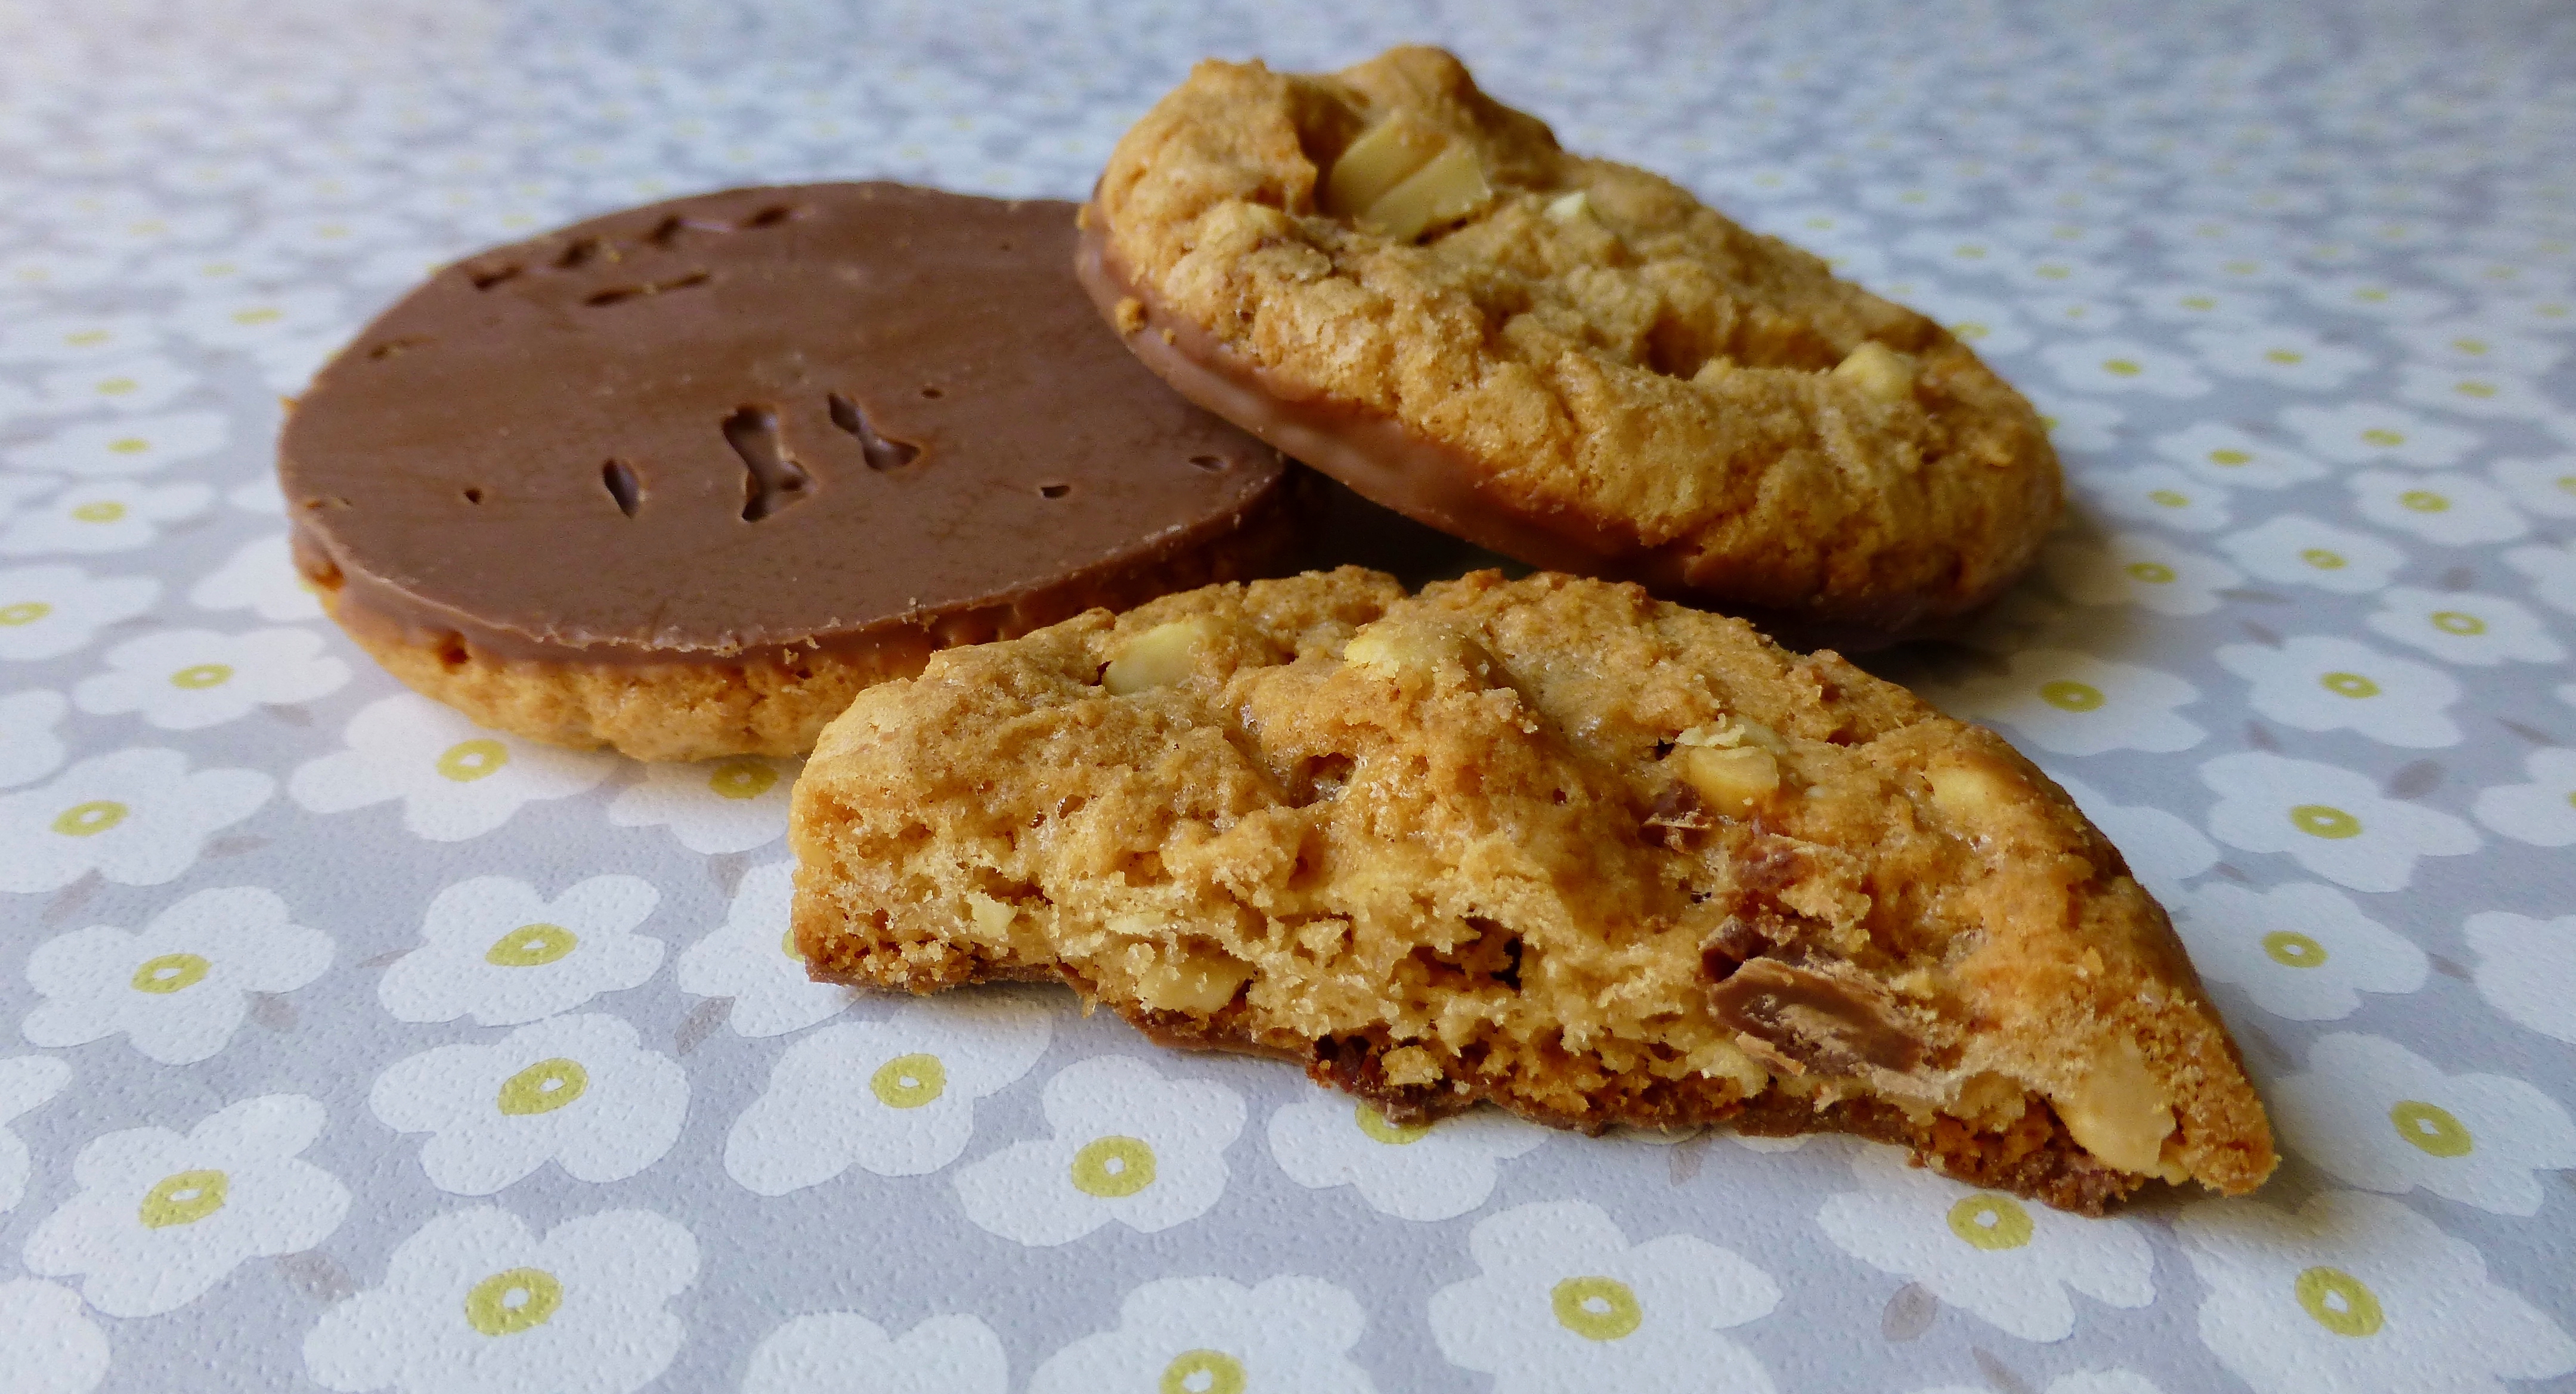 M&S Peanut Butter and Choc Chunk Cookies